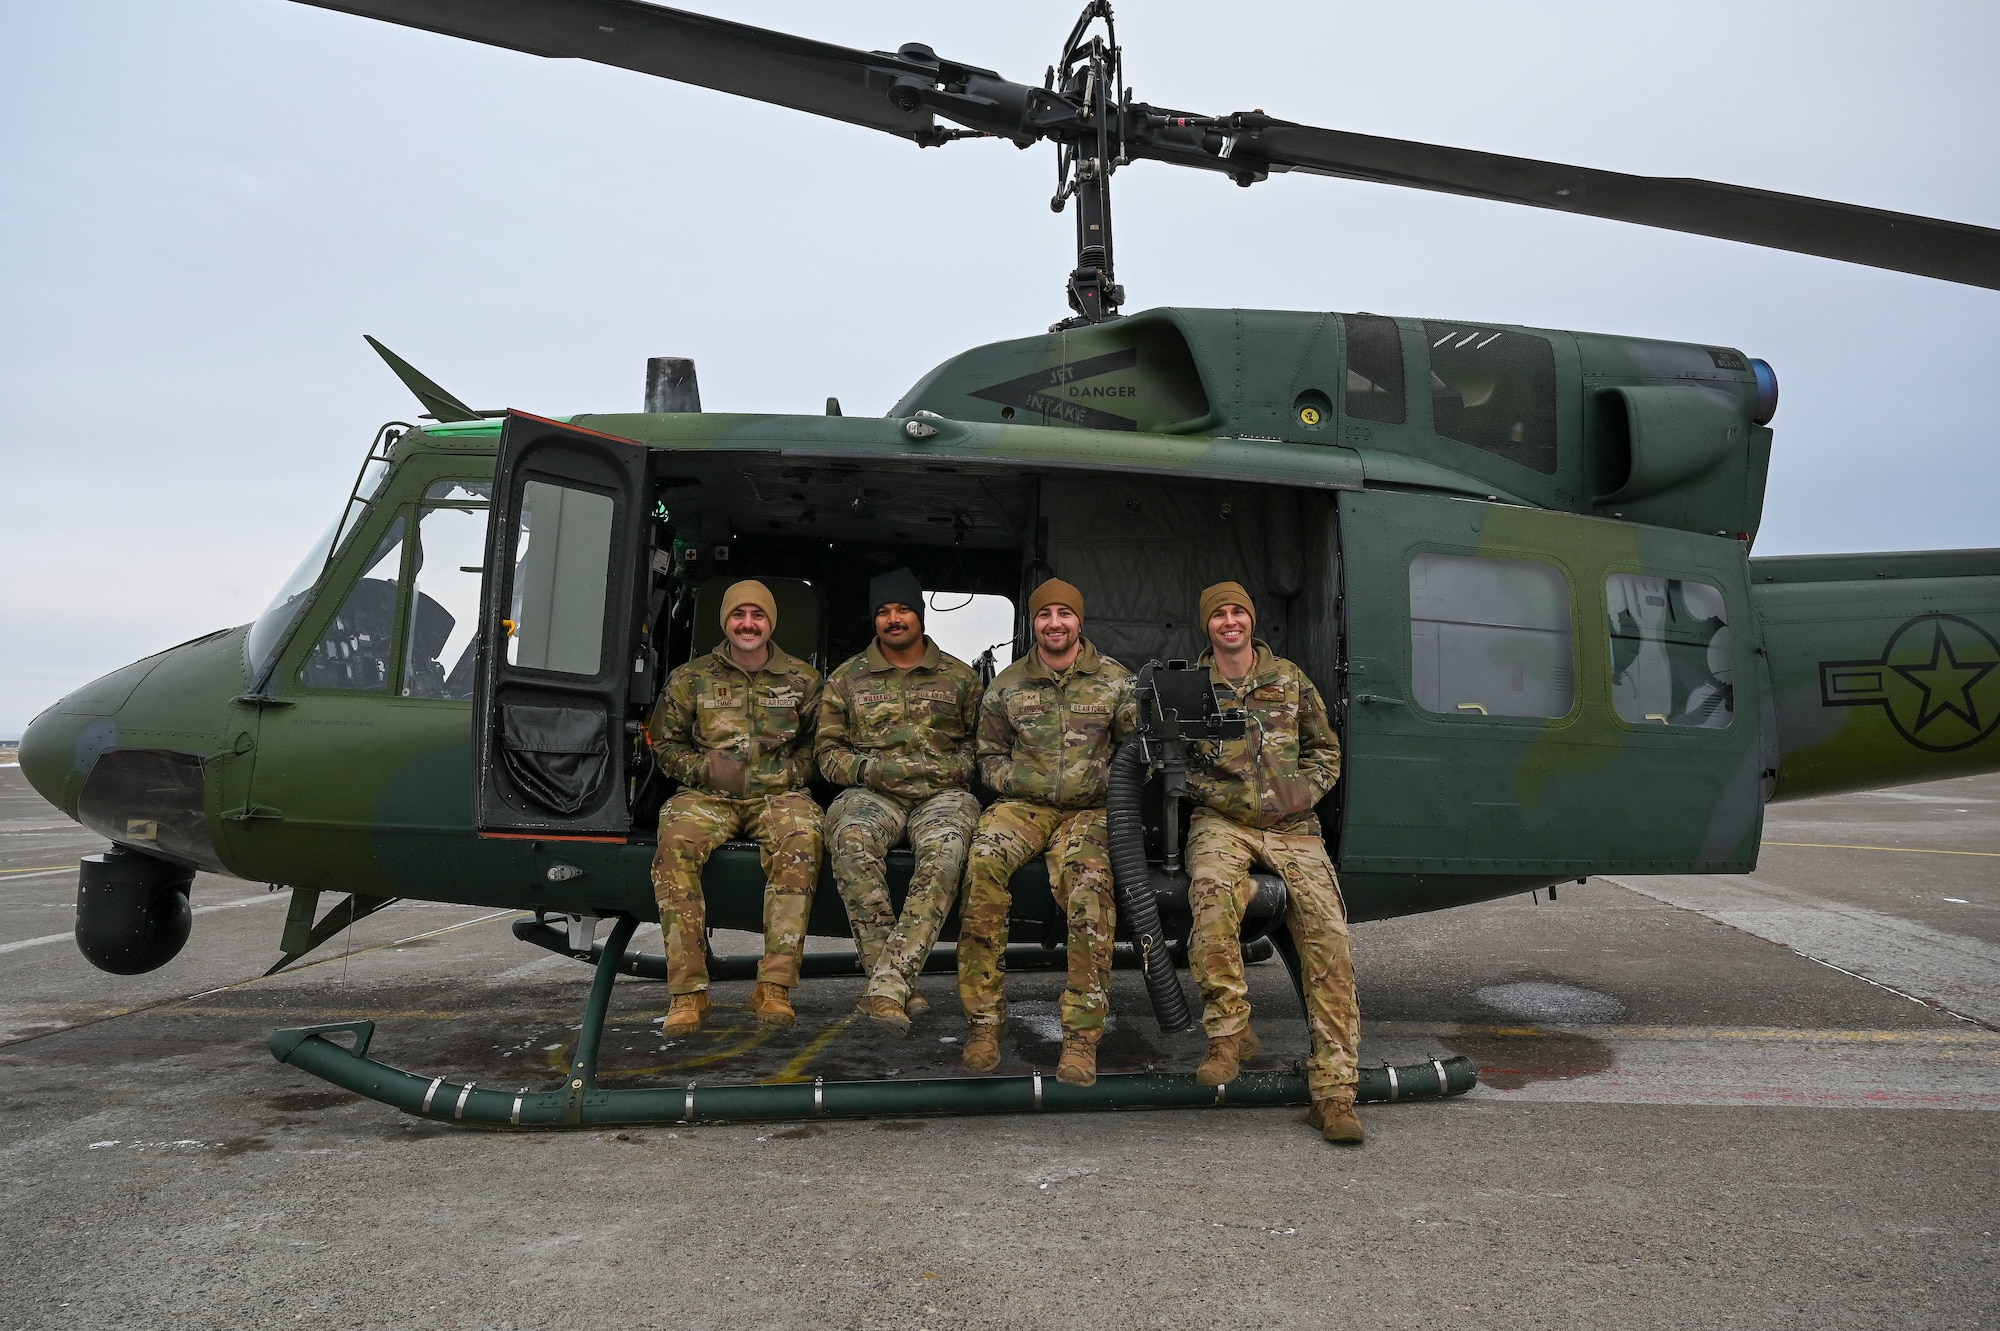 Four Airmen sitting in a helicopter on the ground.